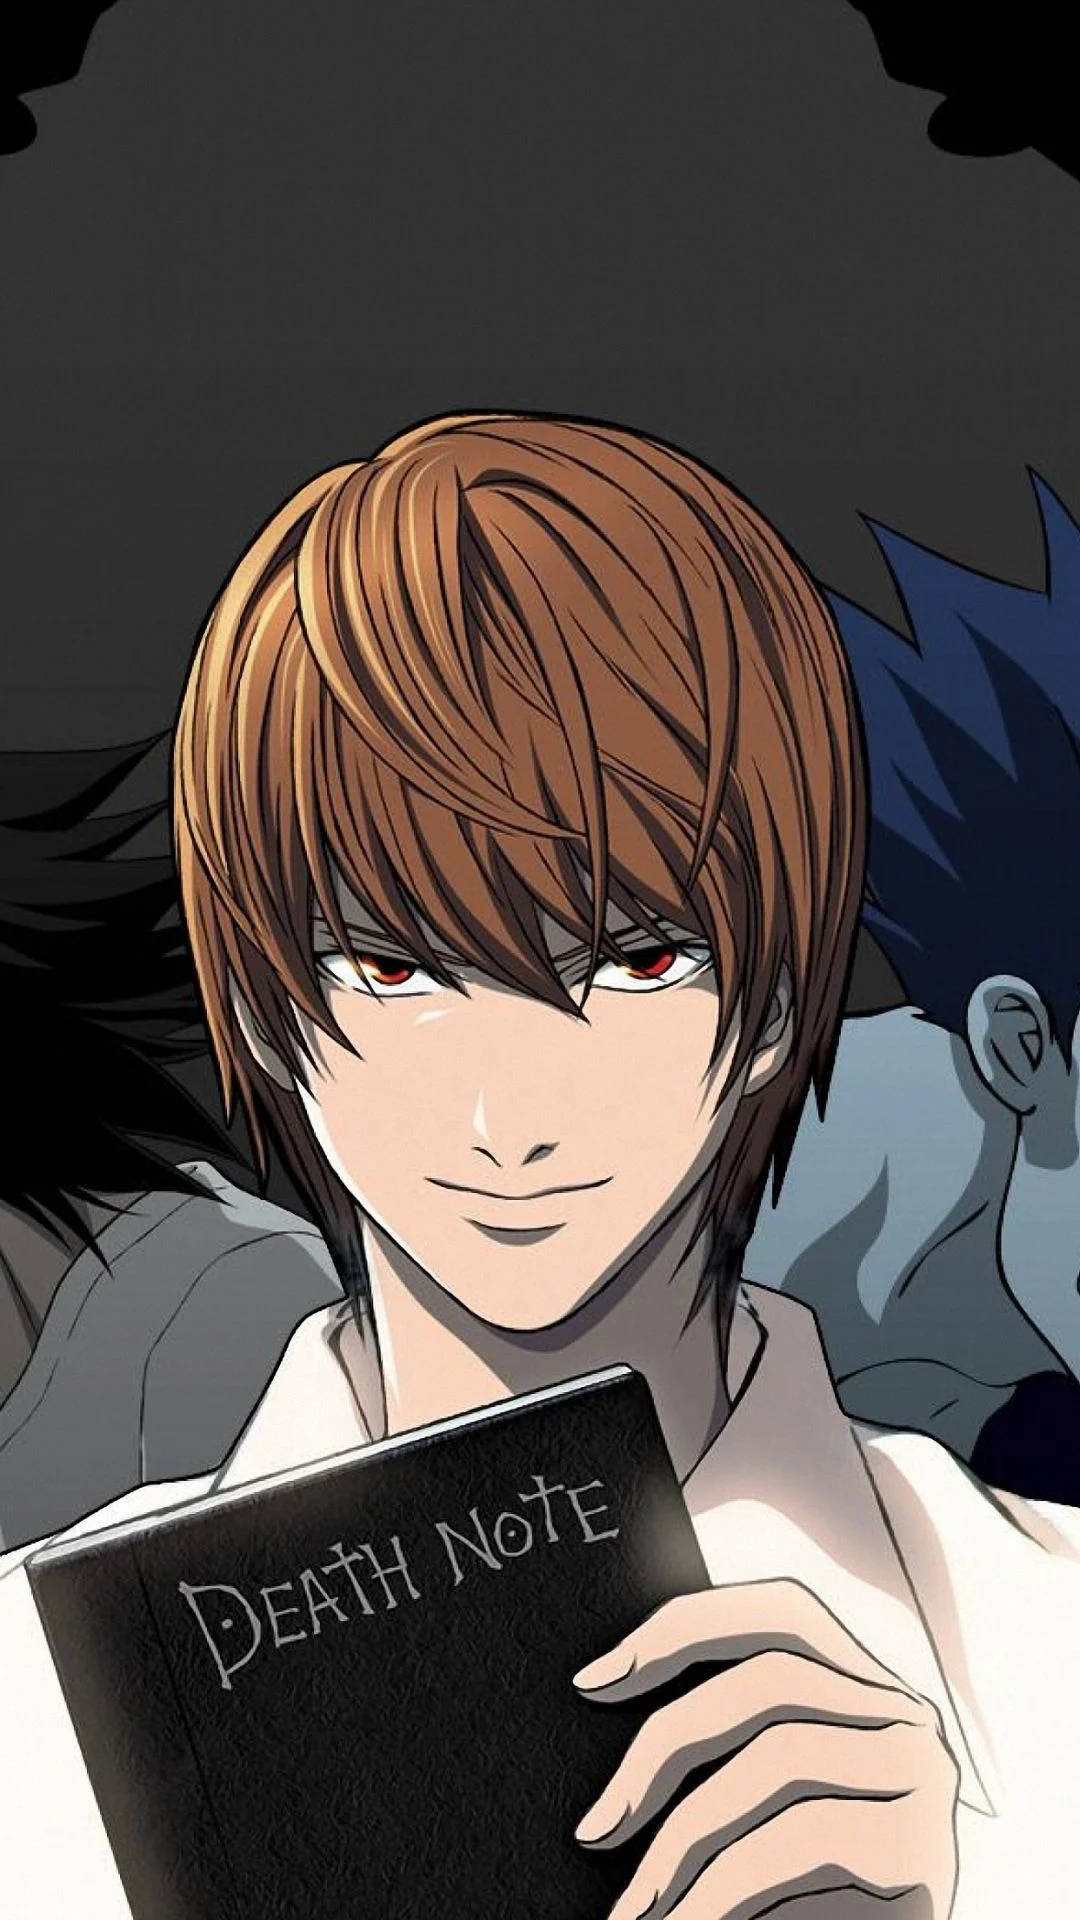 Light Holding The Iconic Death Note iPhone Wallpaper